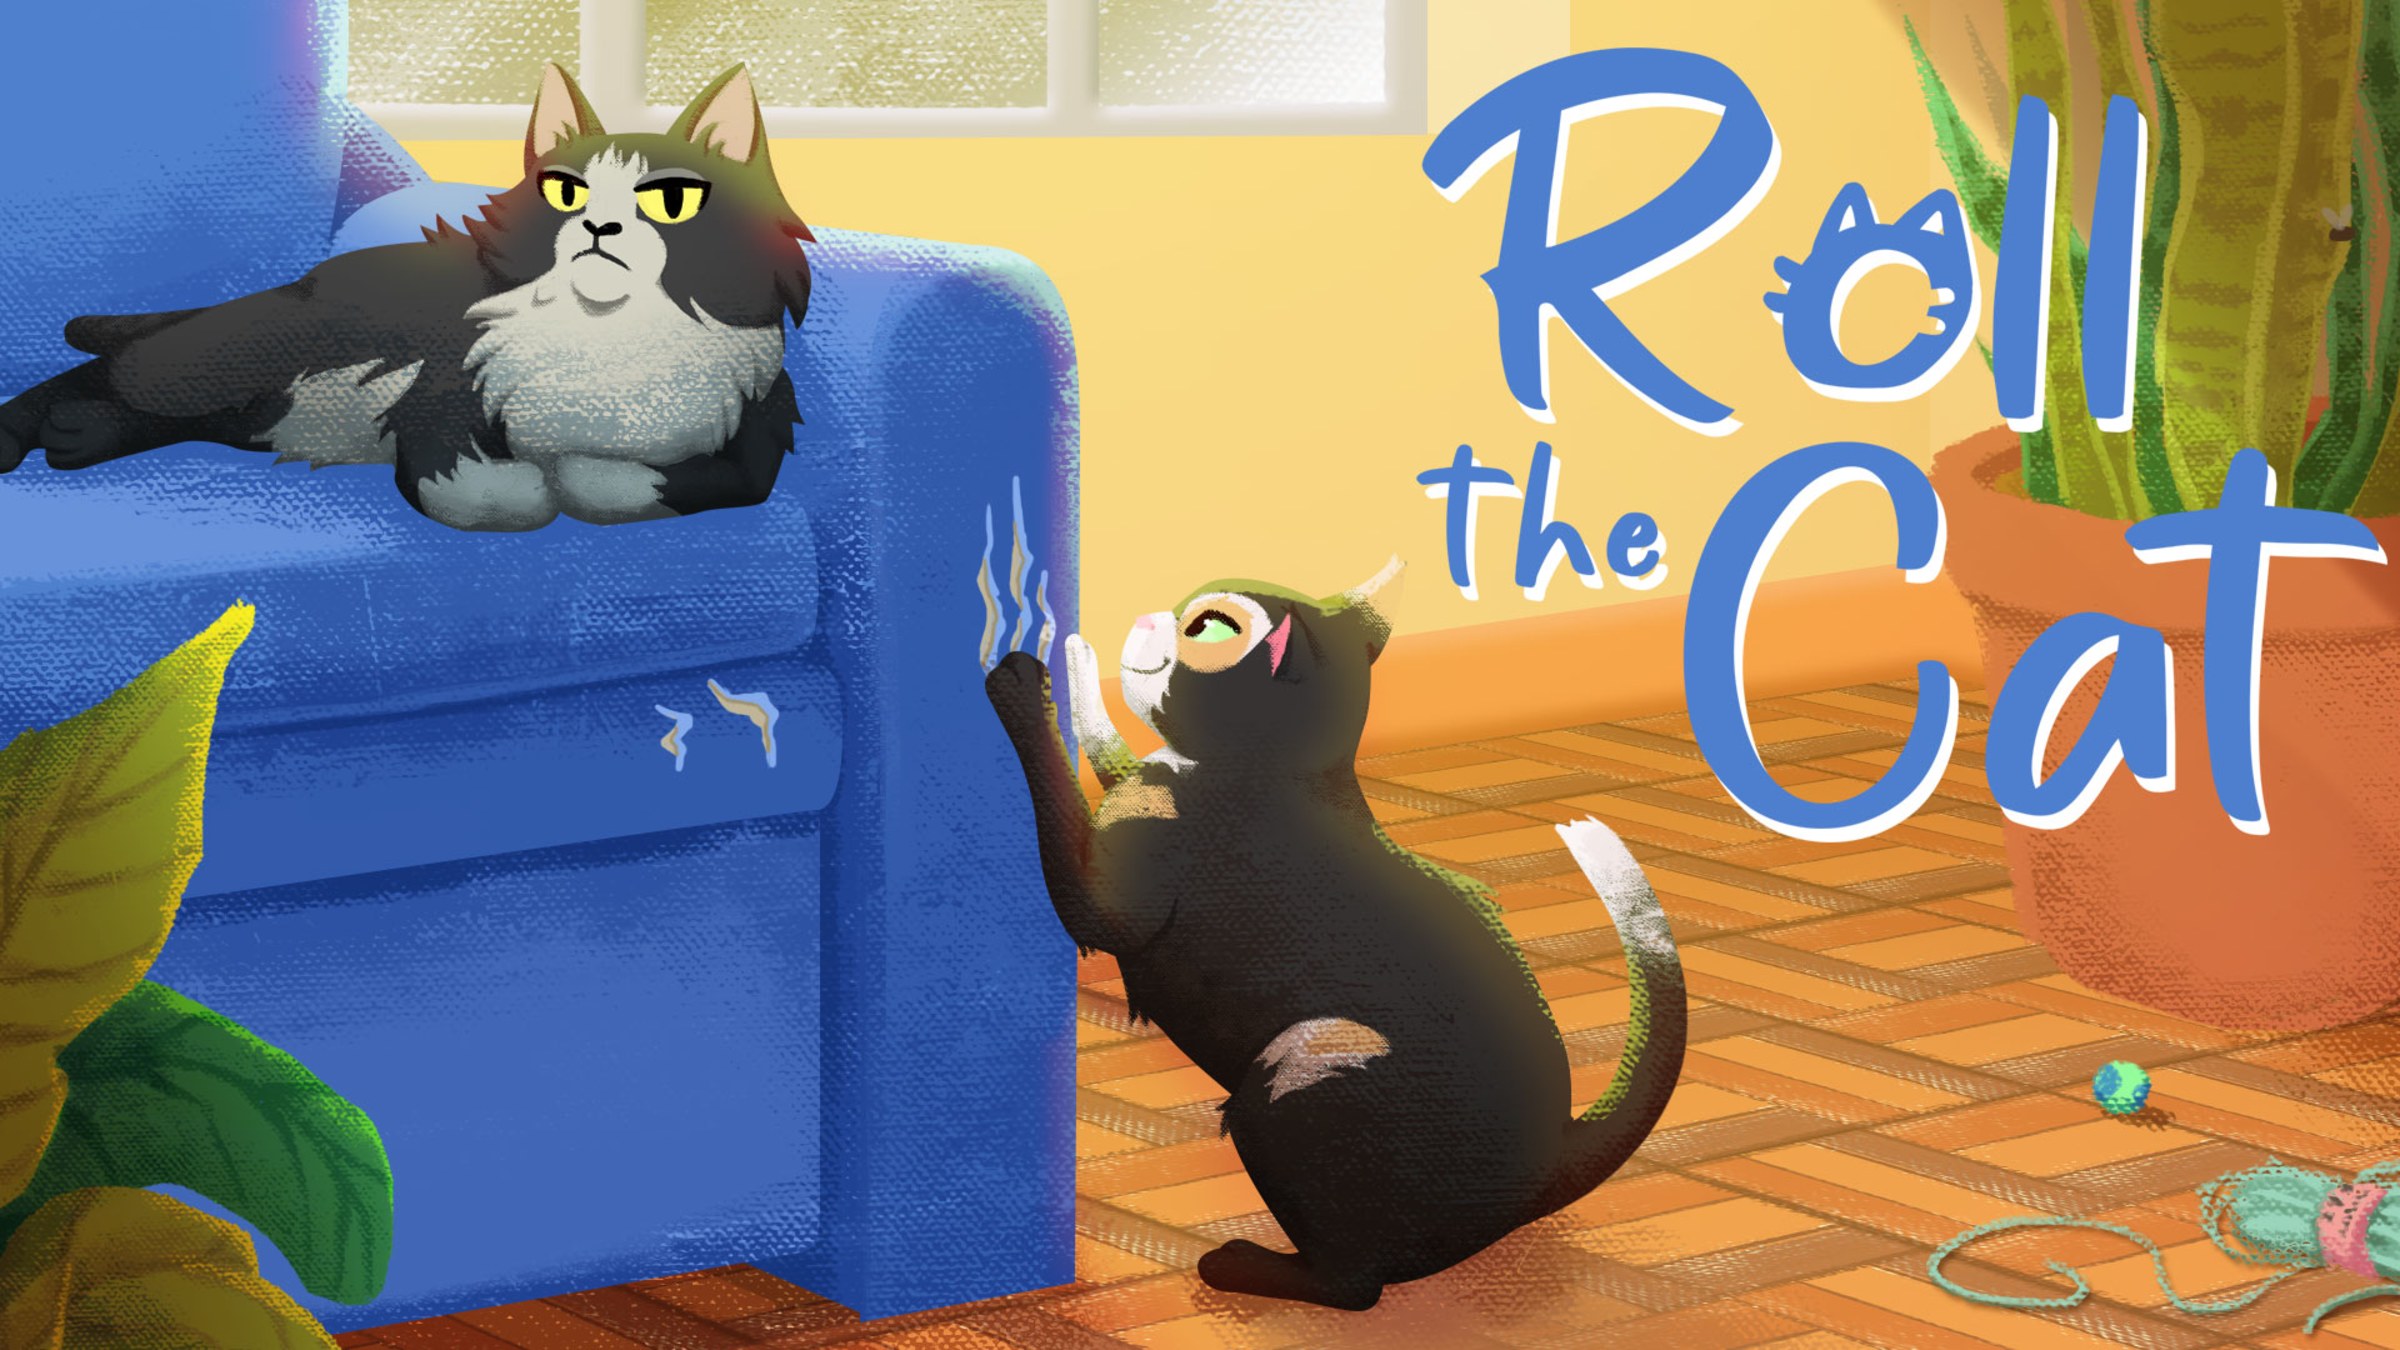 Roll The Cat for Nintendo Switch - Nintendo Official Site